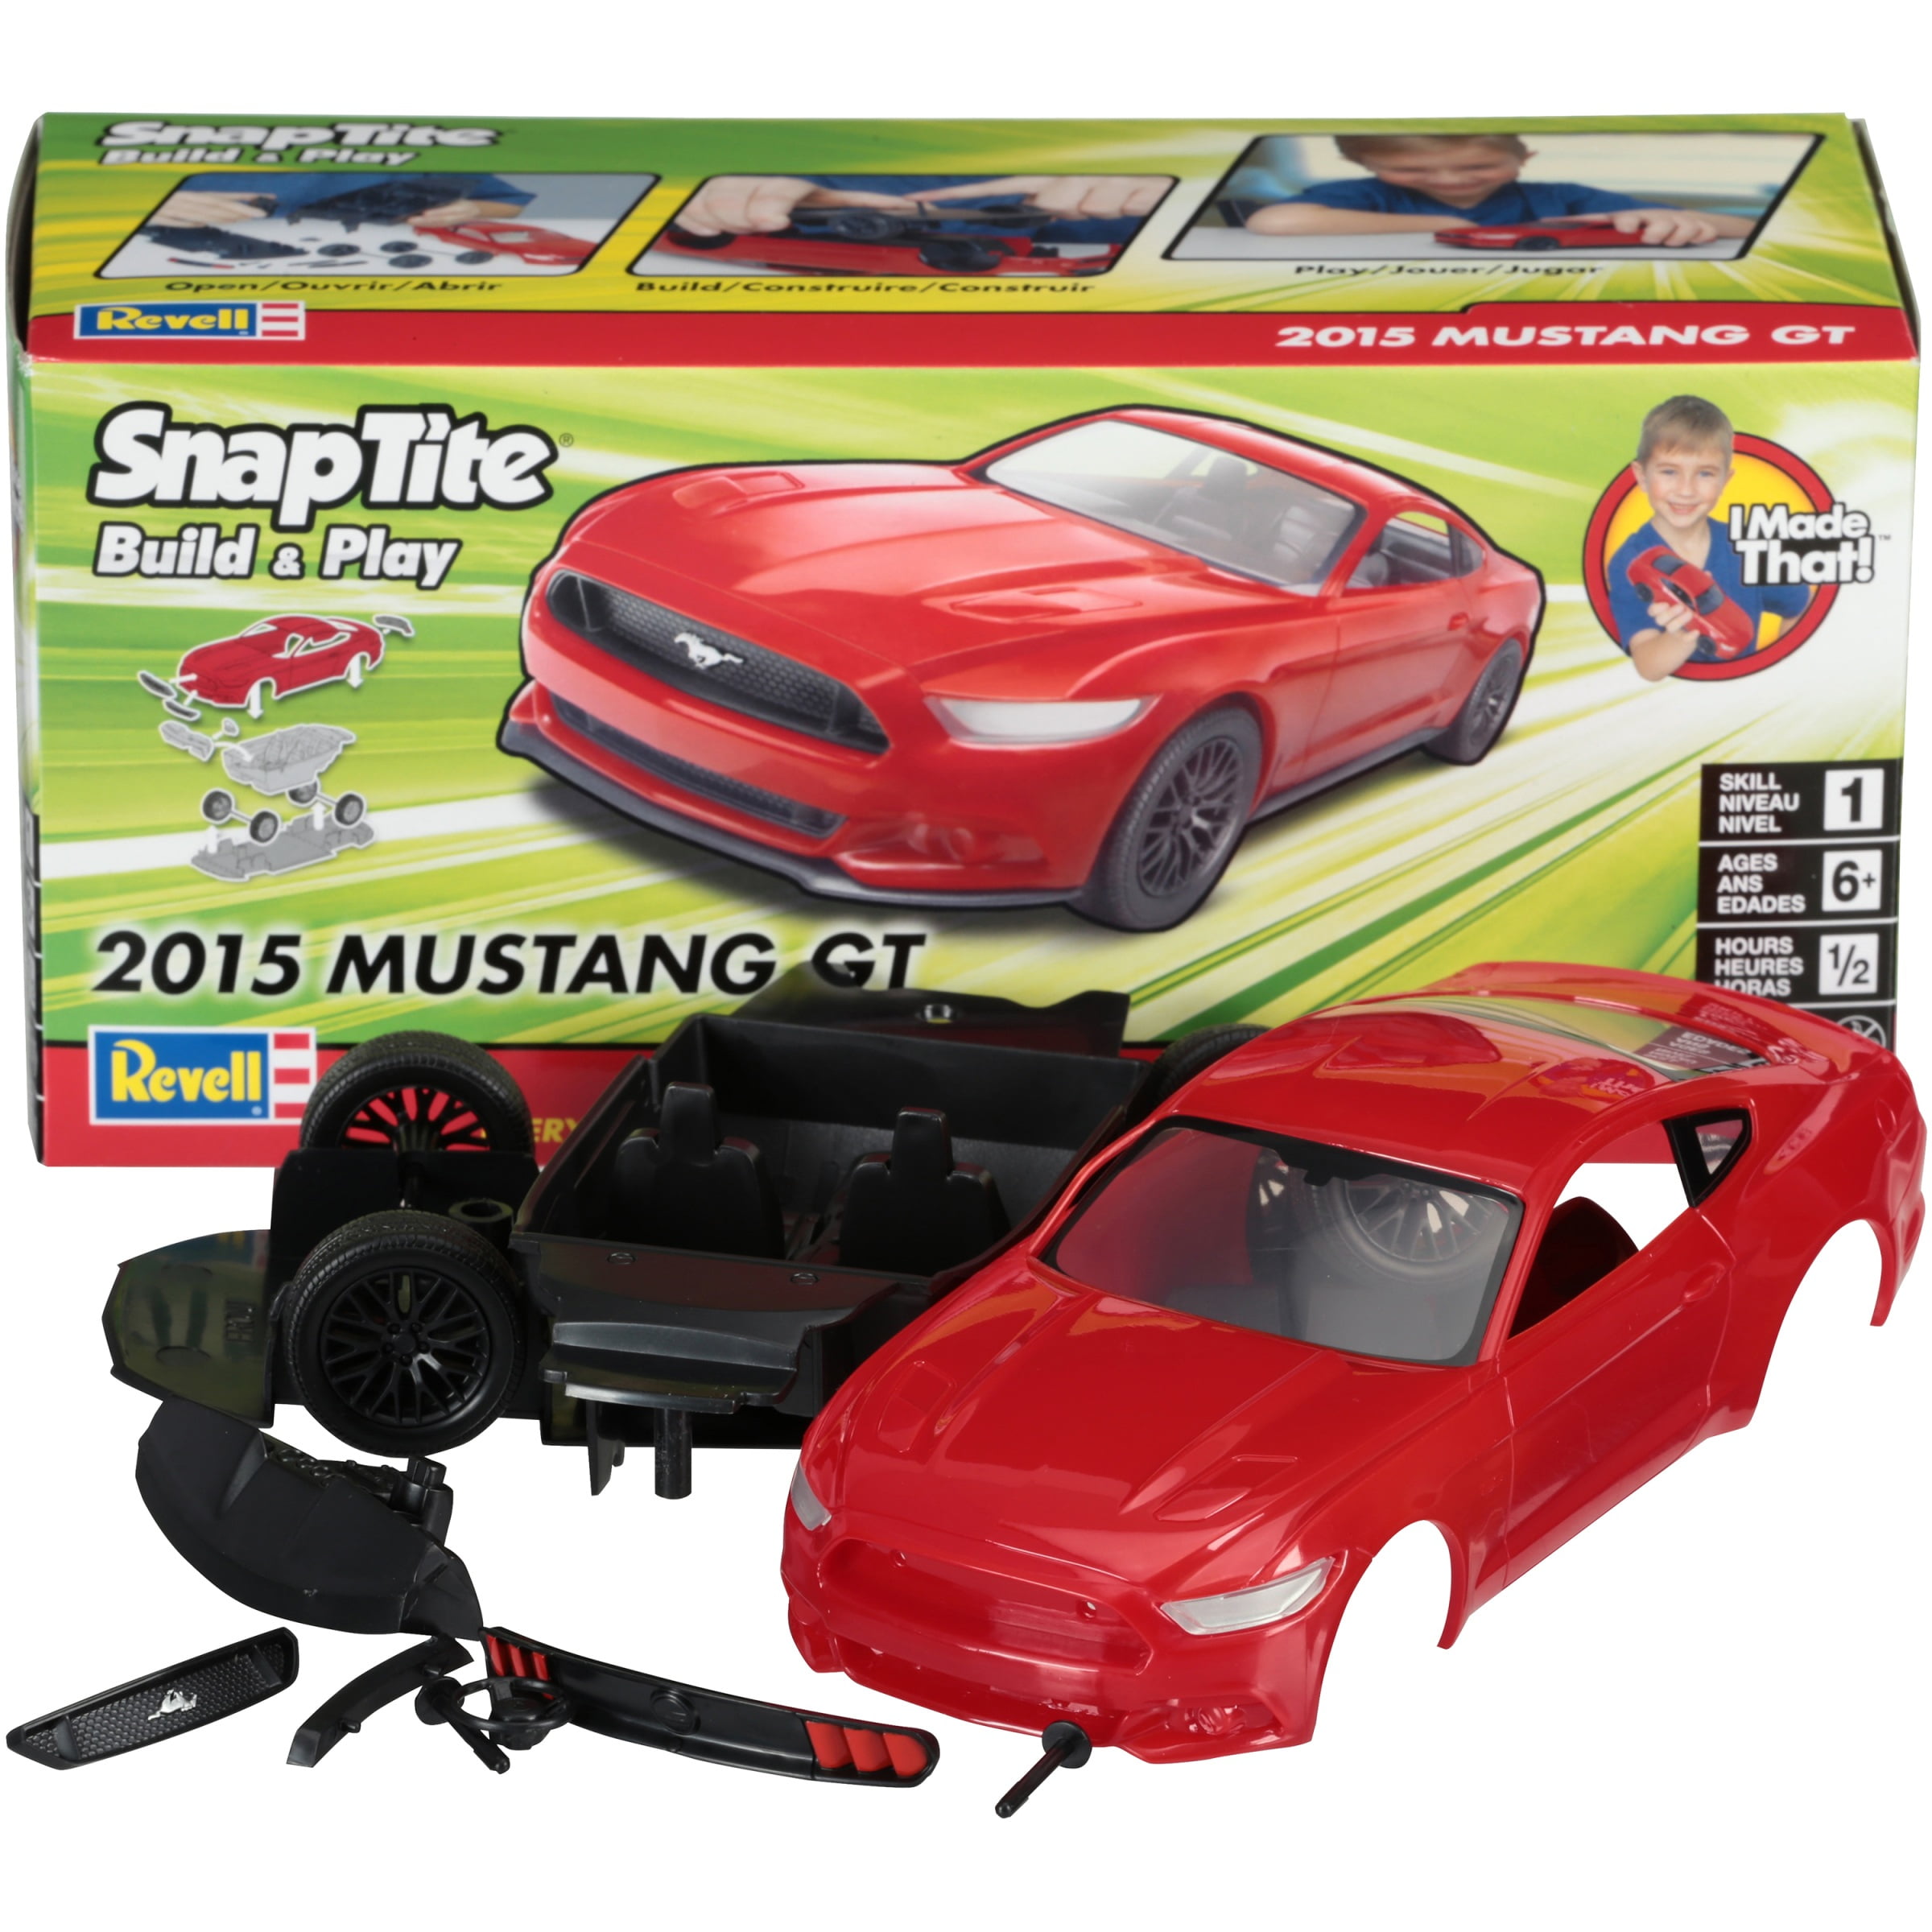 2015 SnapTite® Play Box Kit Mustang 12 & Build pc GT Revell®